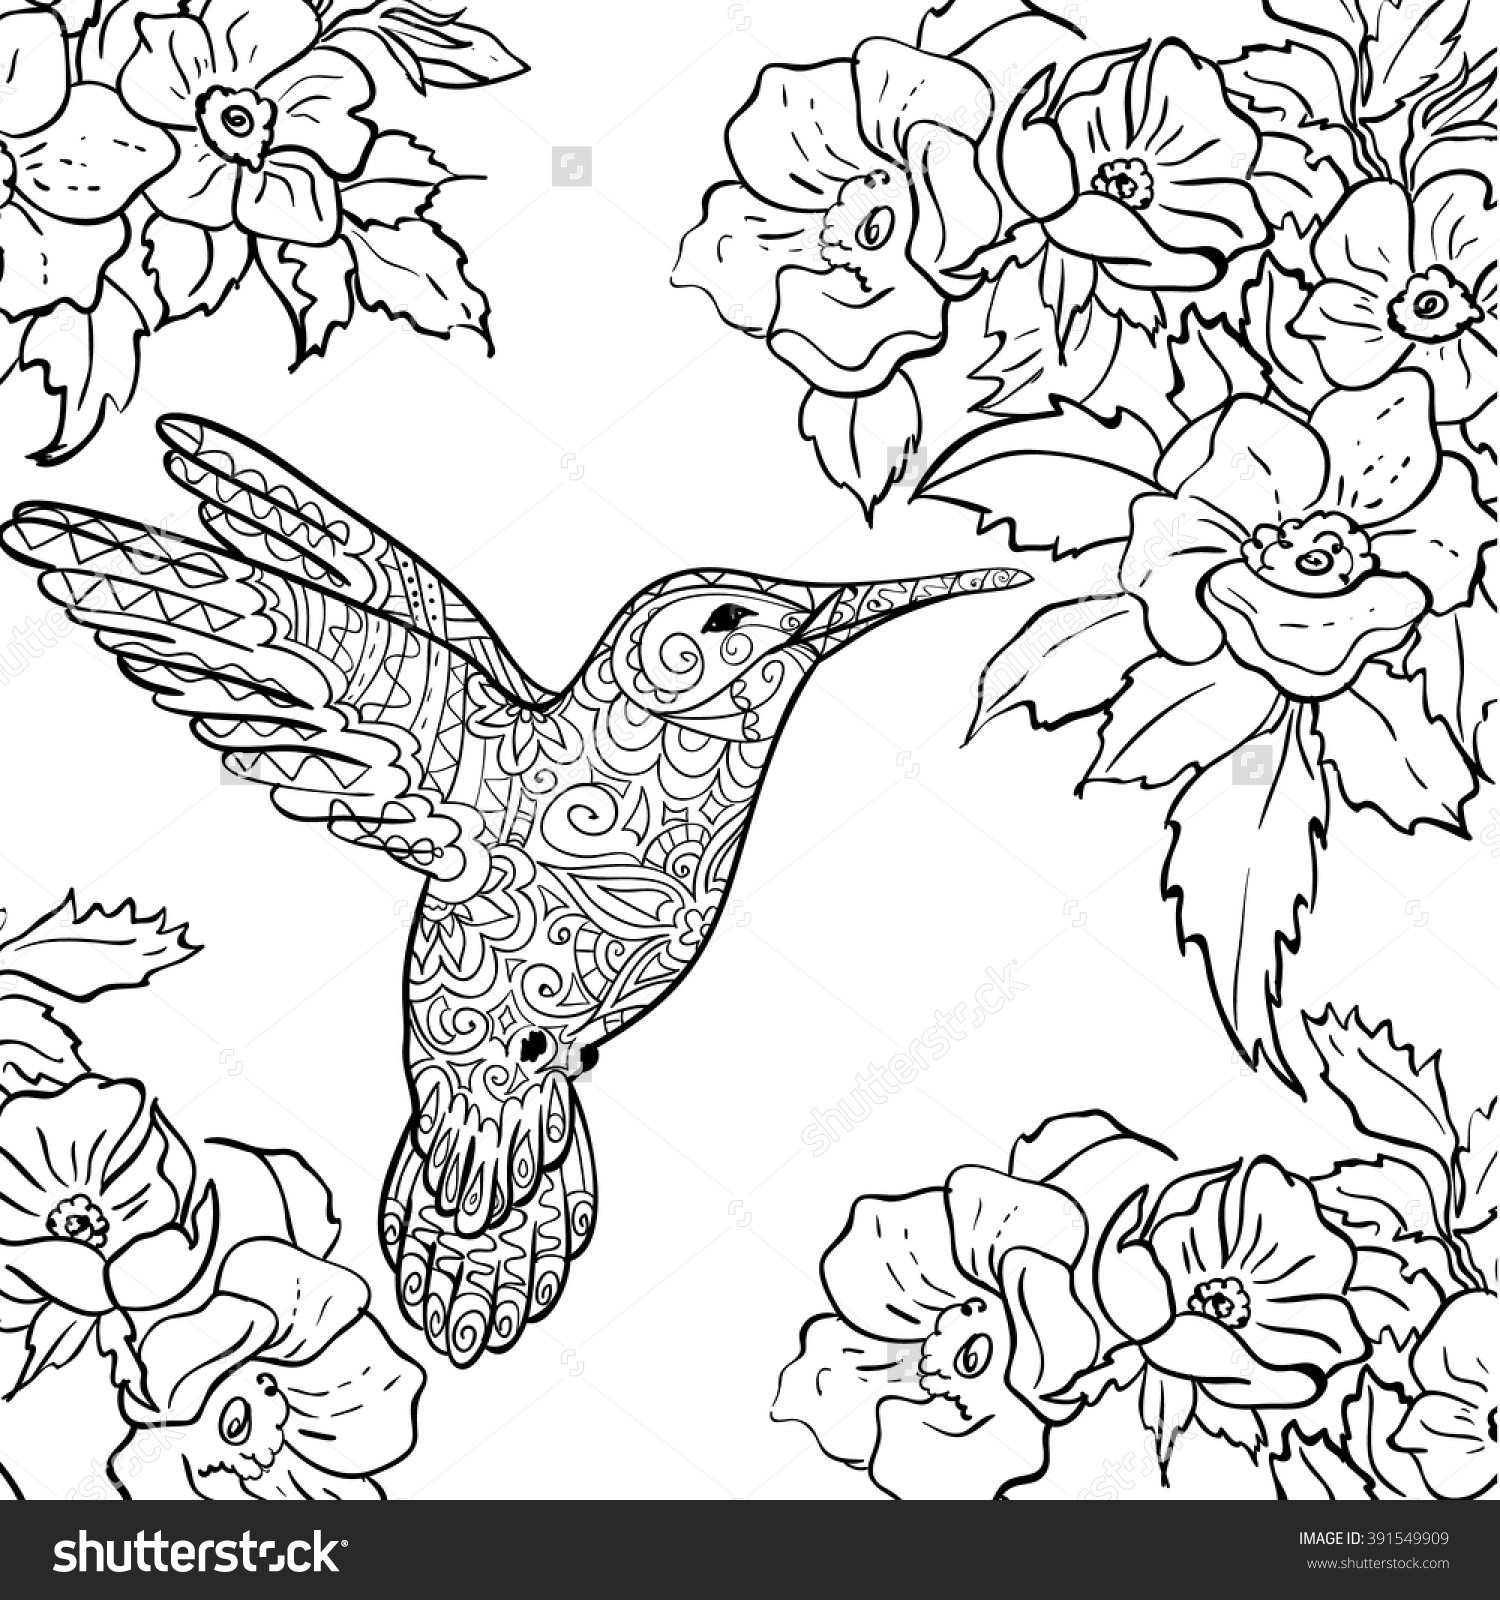 Hummingbird Coloring Pages
 Long tailed Sylph coloring Download Long tailed Sylph